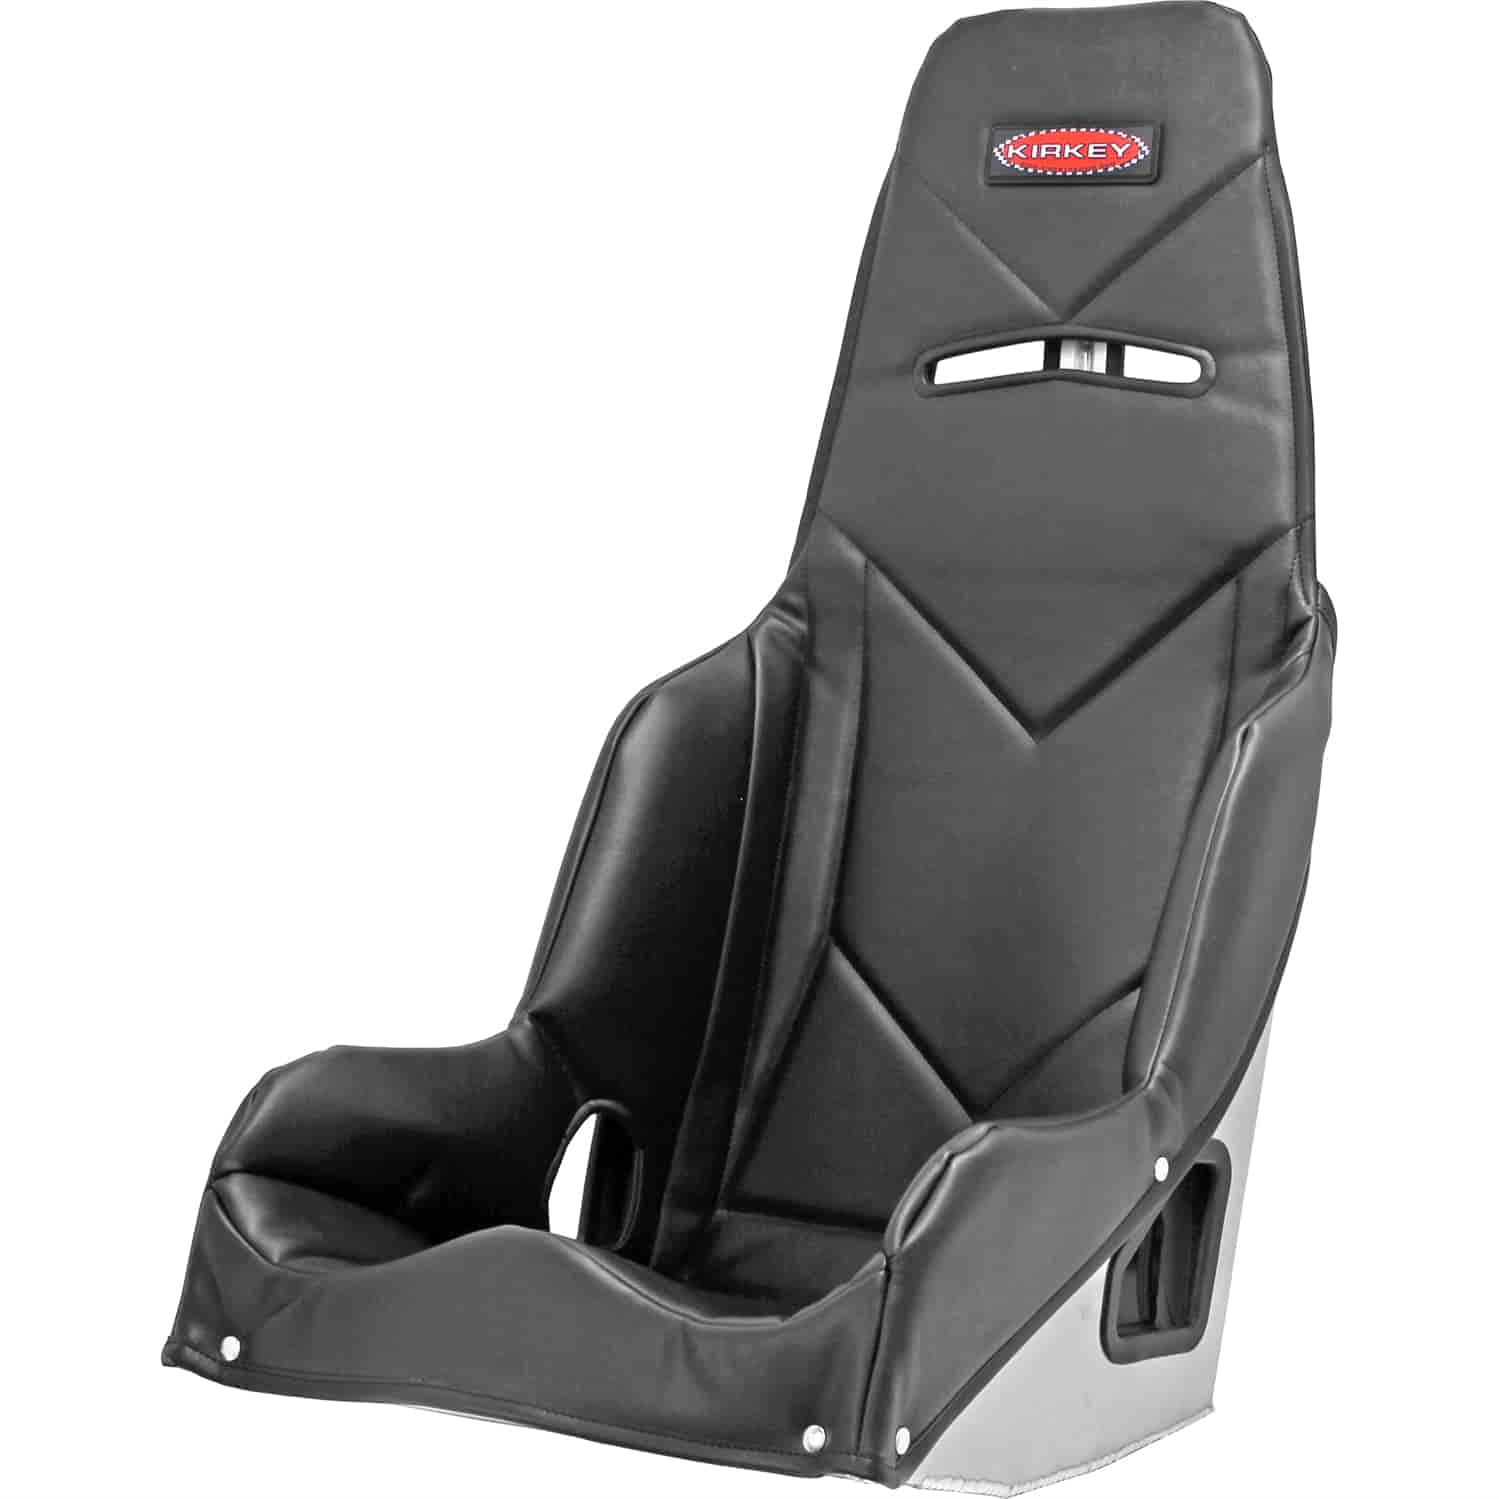 55 Series Pro Street Drag Seat Cover 16" Hip Width